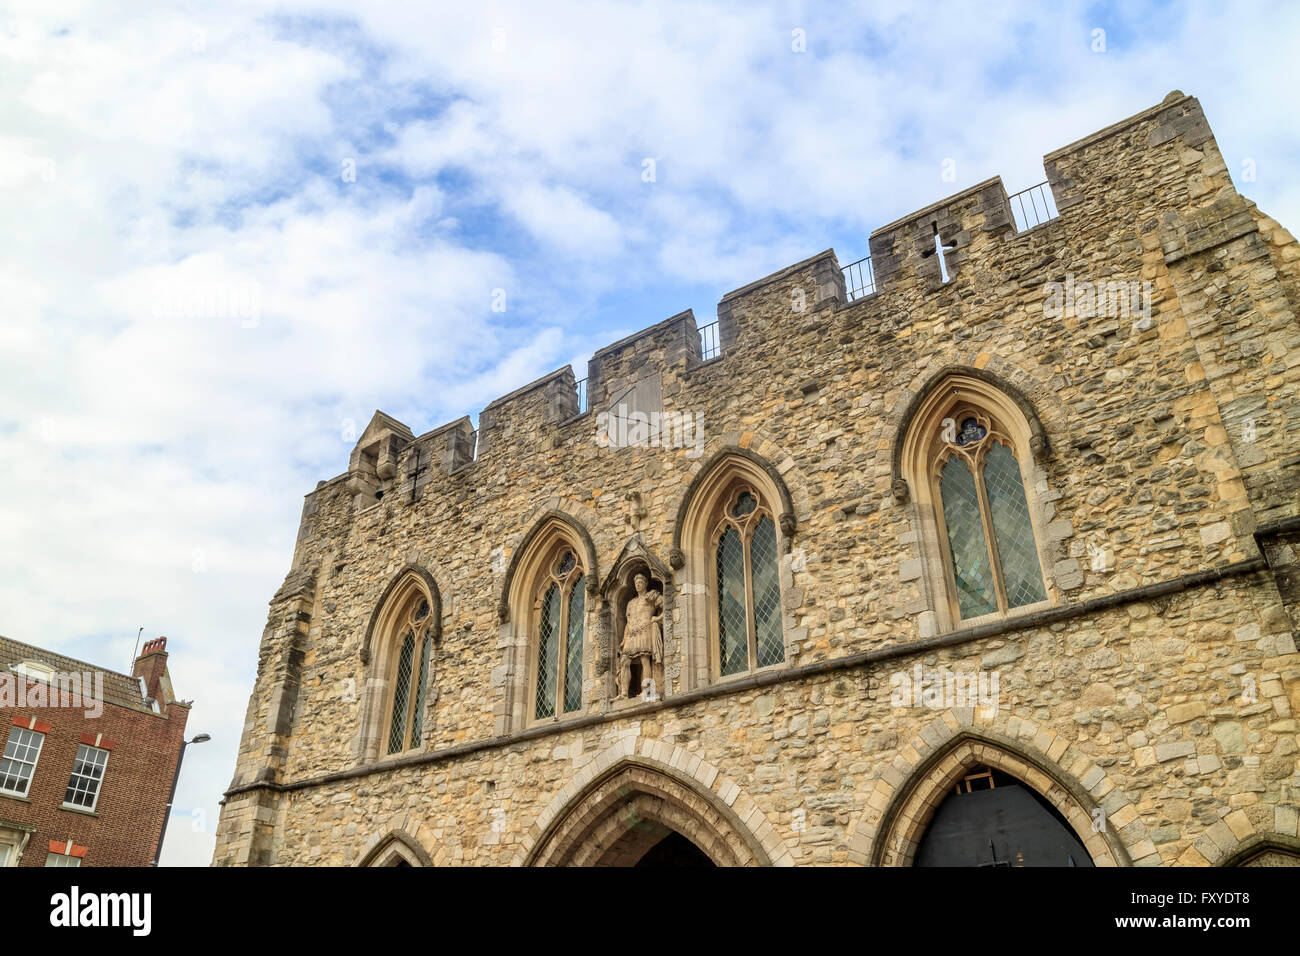 The famous historical building - Bargate at Southampton Stock Photo